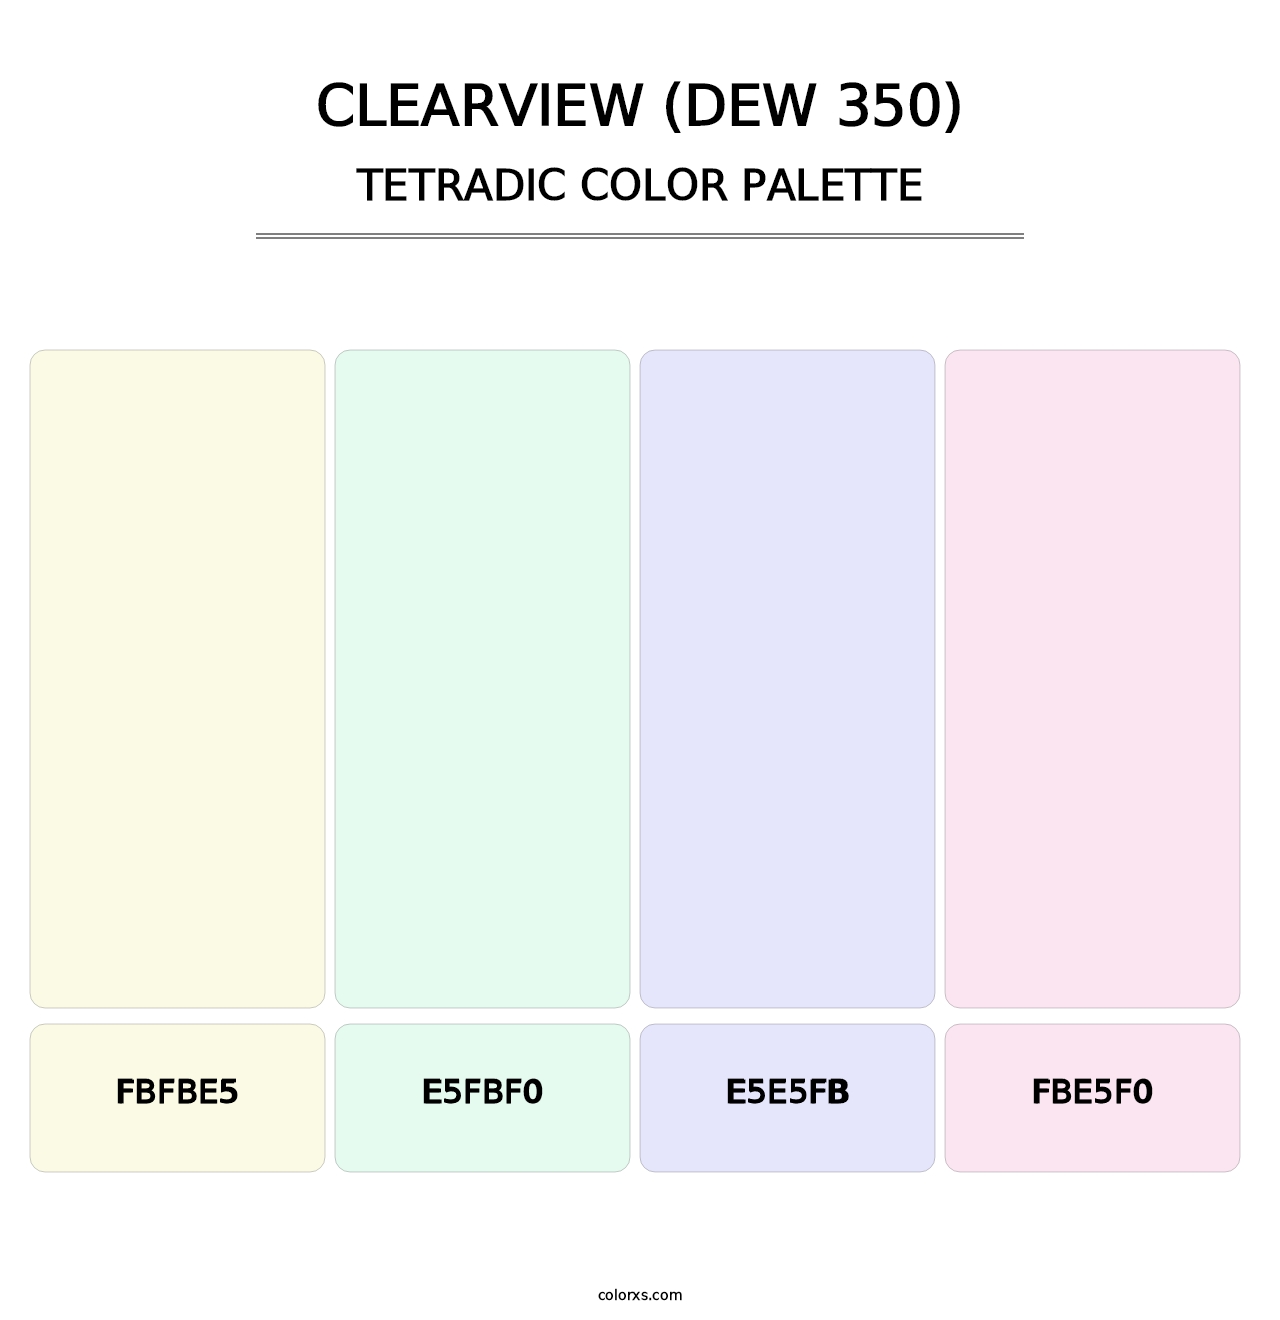 Clearview (DEW 350) - Tetradic Color Palette